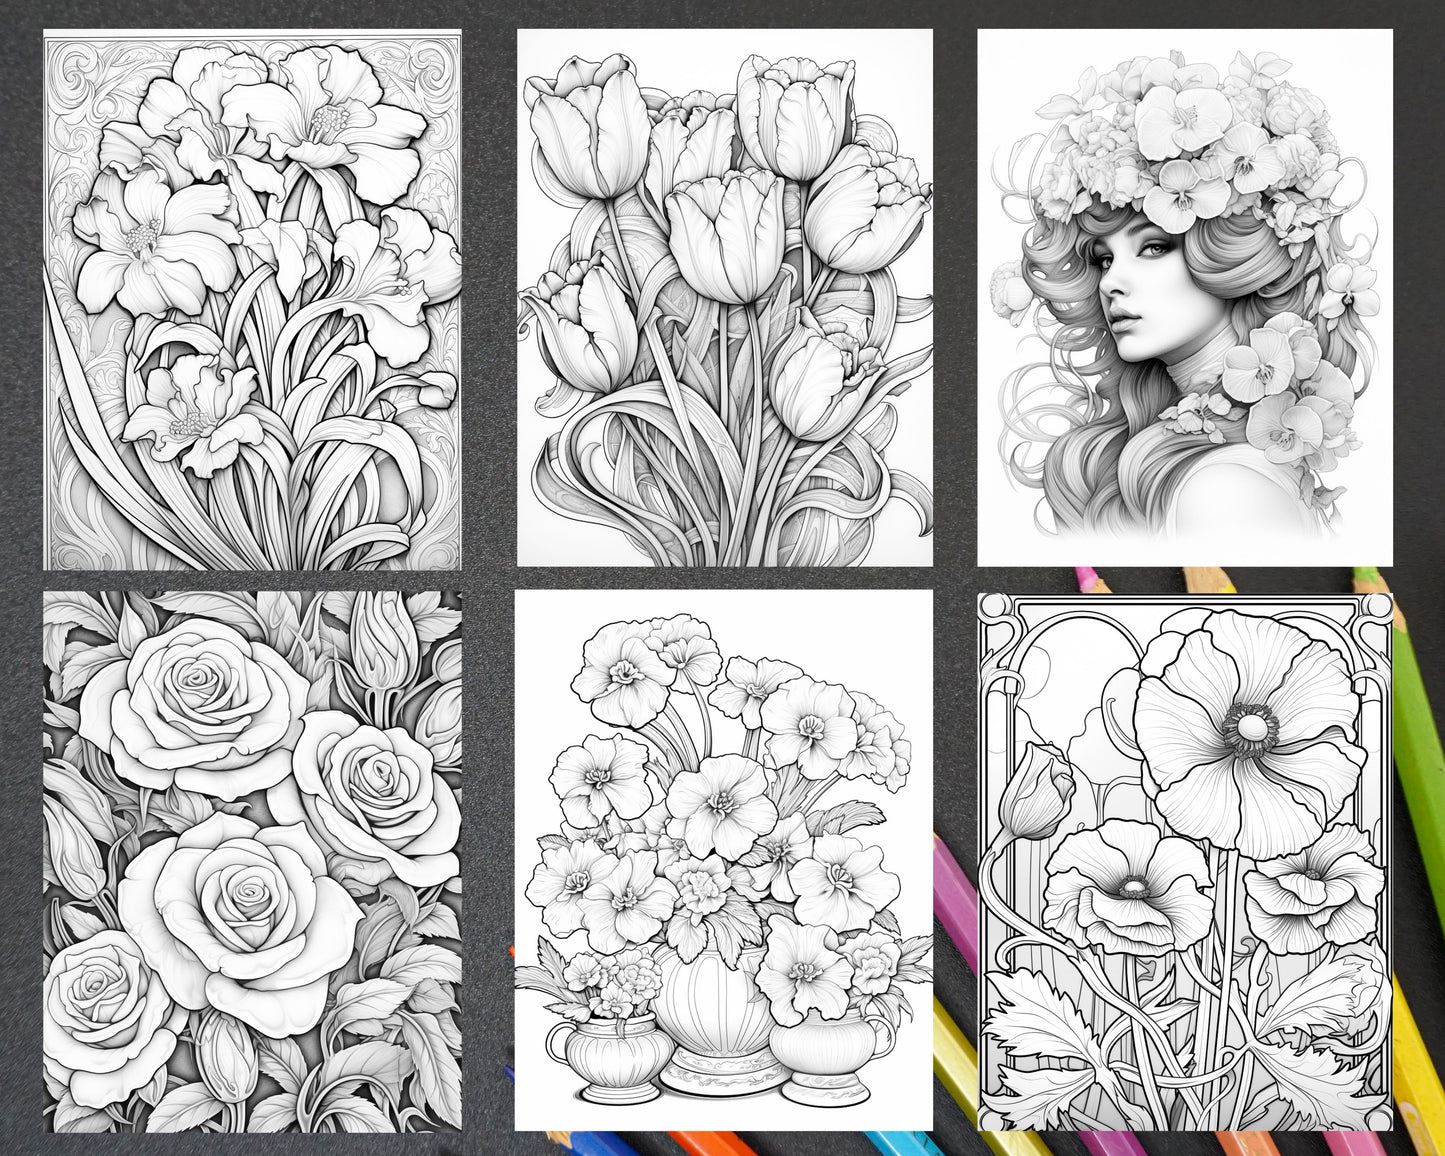 adult coloring pages, adult coloring sheets, adult coloring book pdf, adult coloring book printable, grayscale coloring pages, grayscale coloring books, spring coloring pages for adults, spring coloring book pdf, flower coloring pages for adults, flower coloring book pdf, art nouveau flowers coloring pages